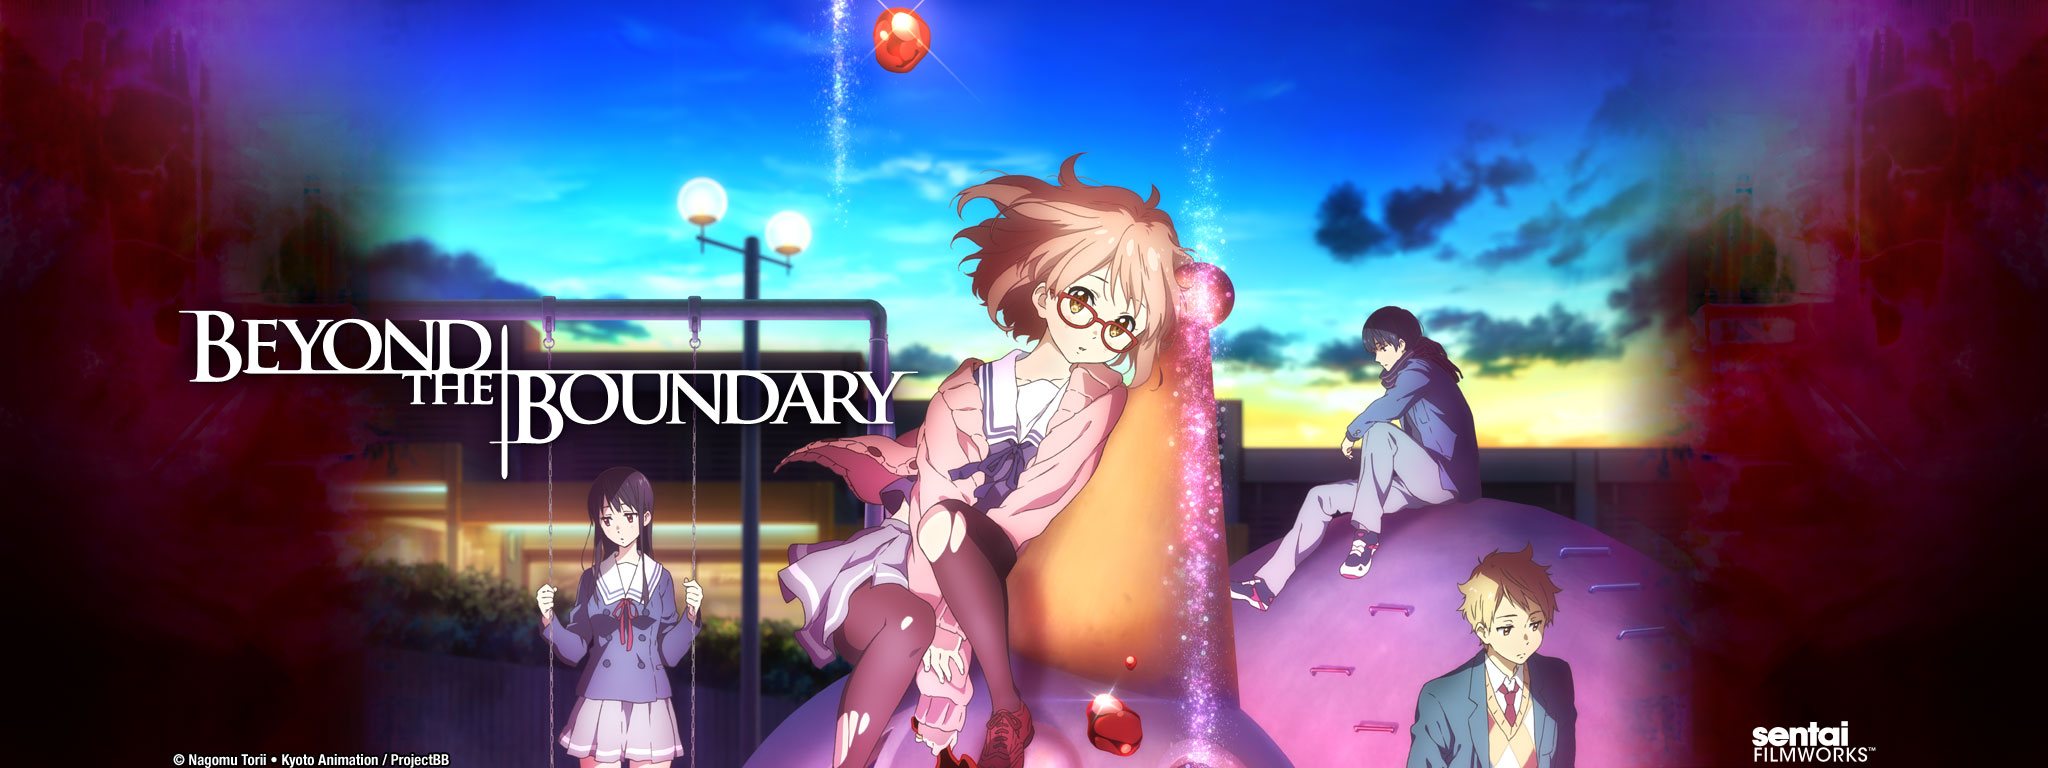 Title Art for Beyond the Boundary